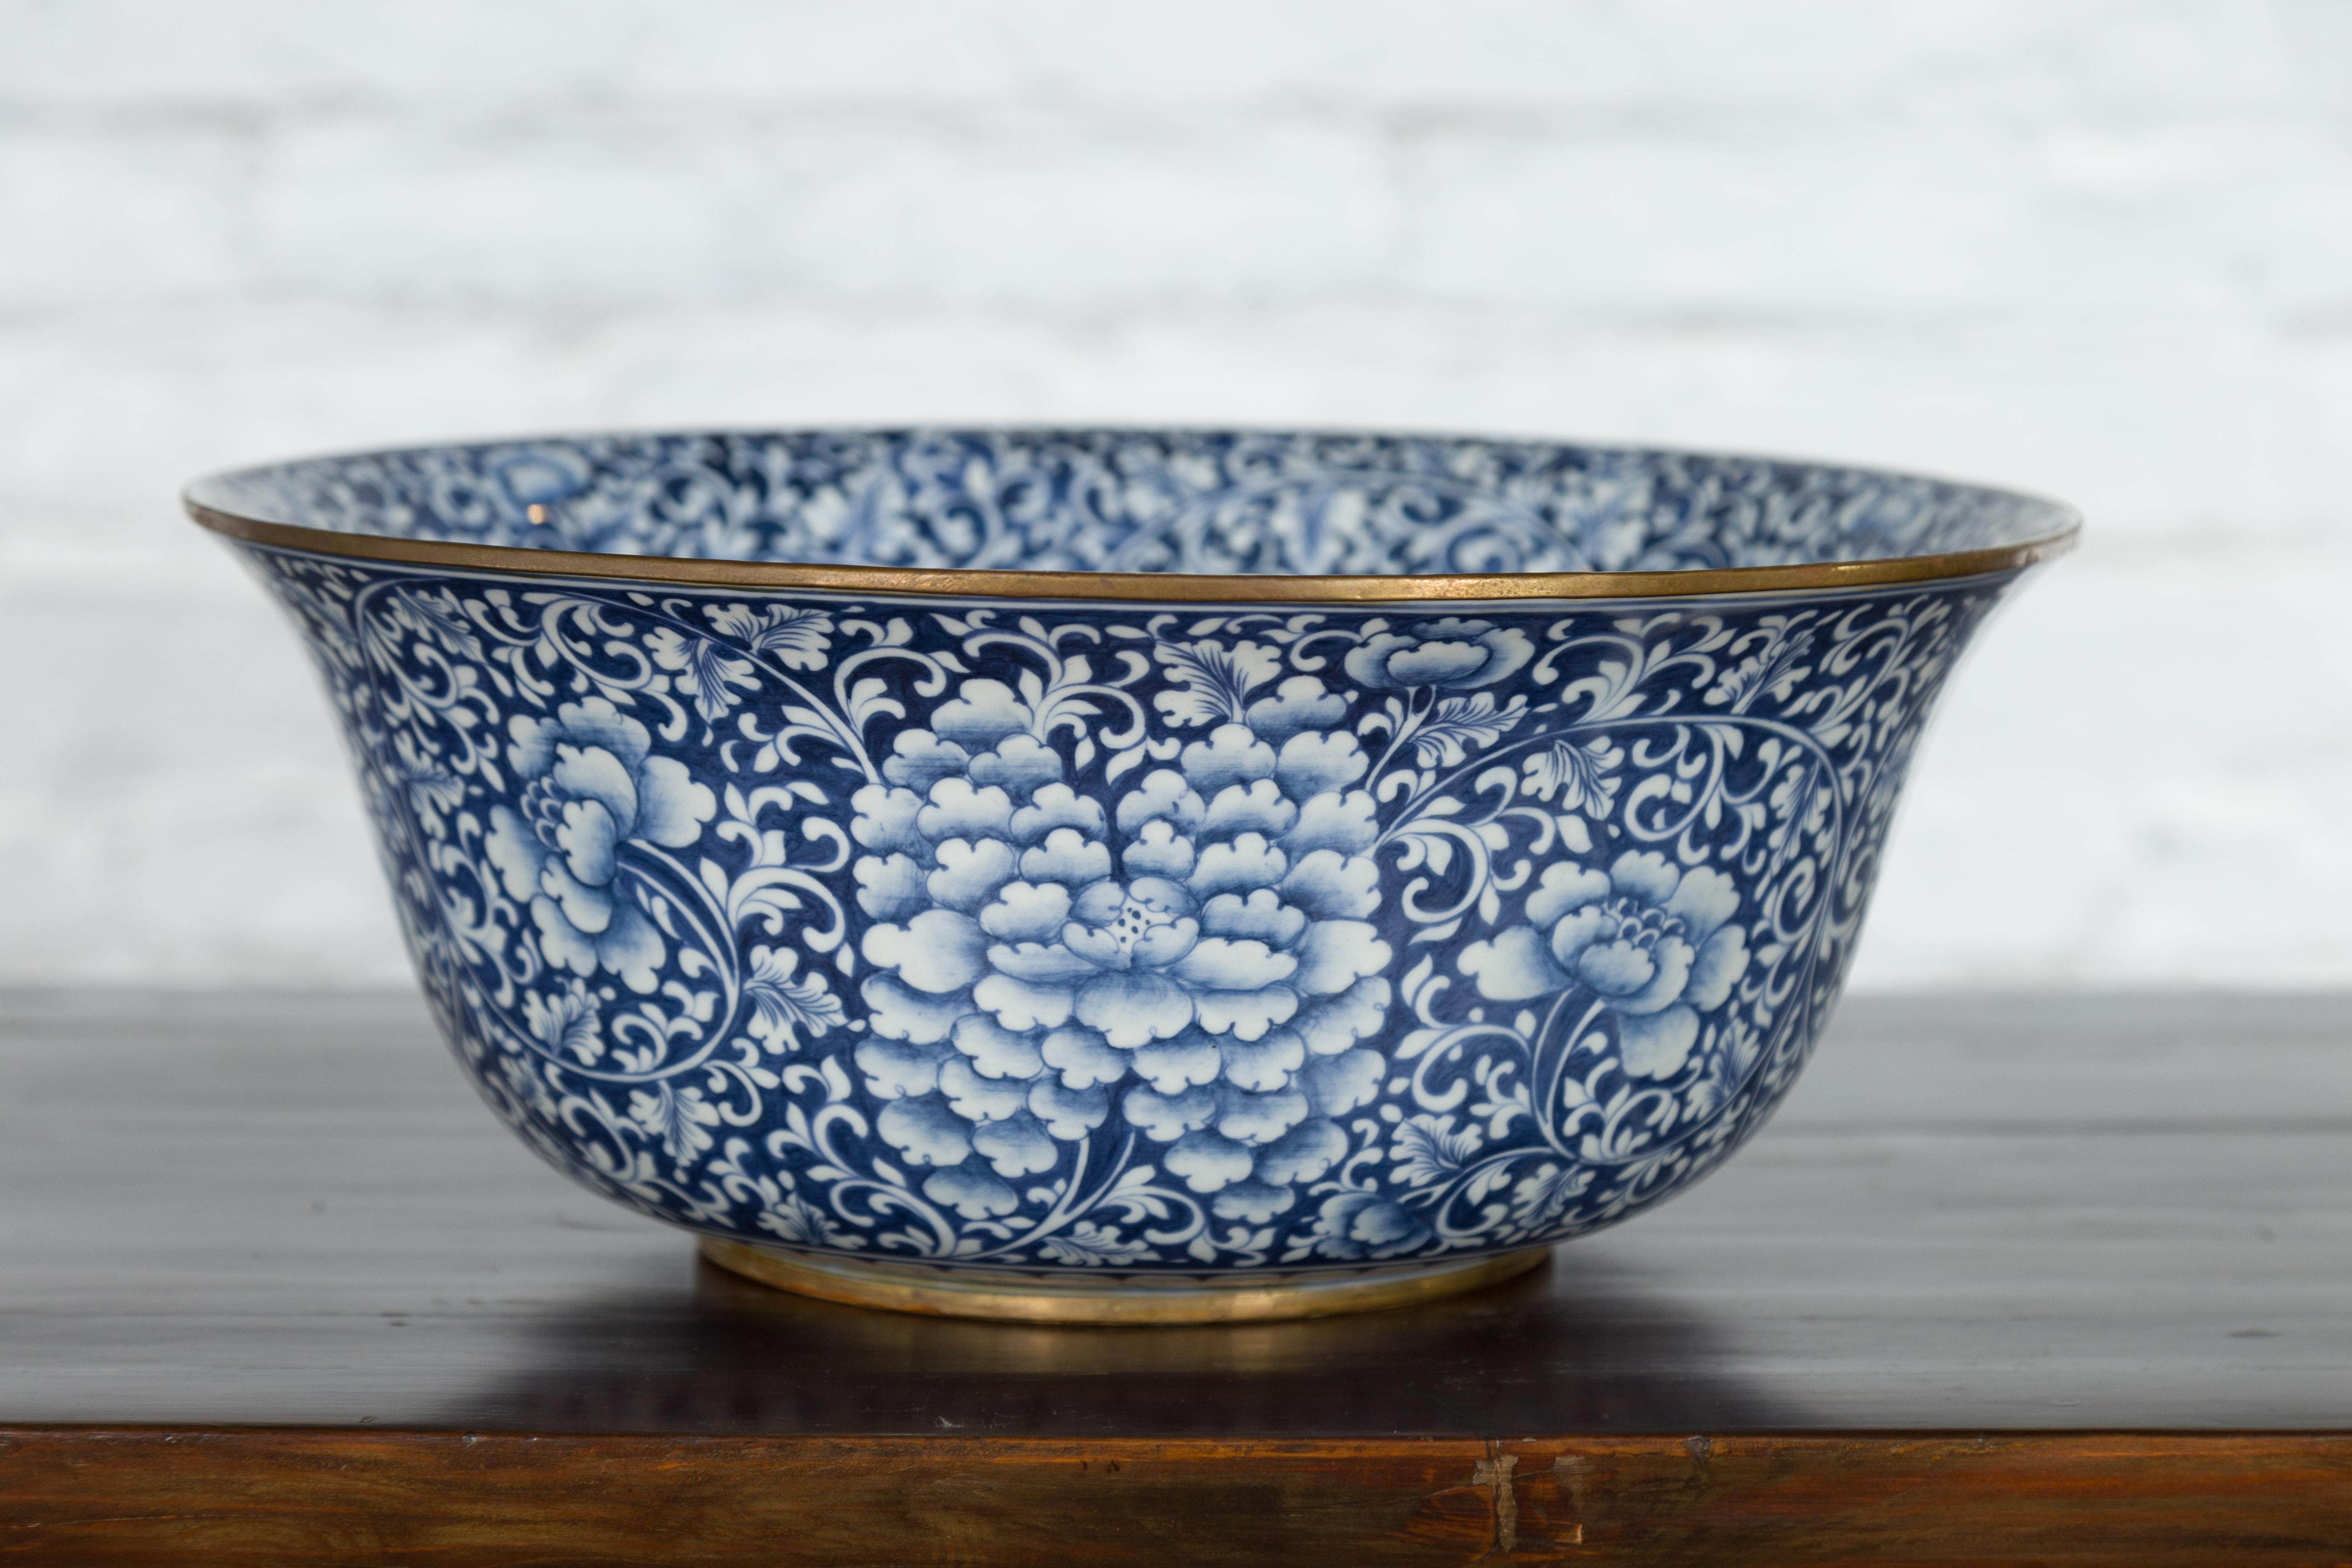 Large Thai Hand-Painted Blue and White Porcelain Bowl with Floral Motifs 13